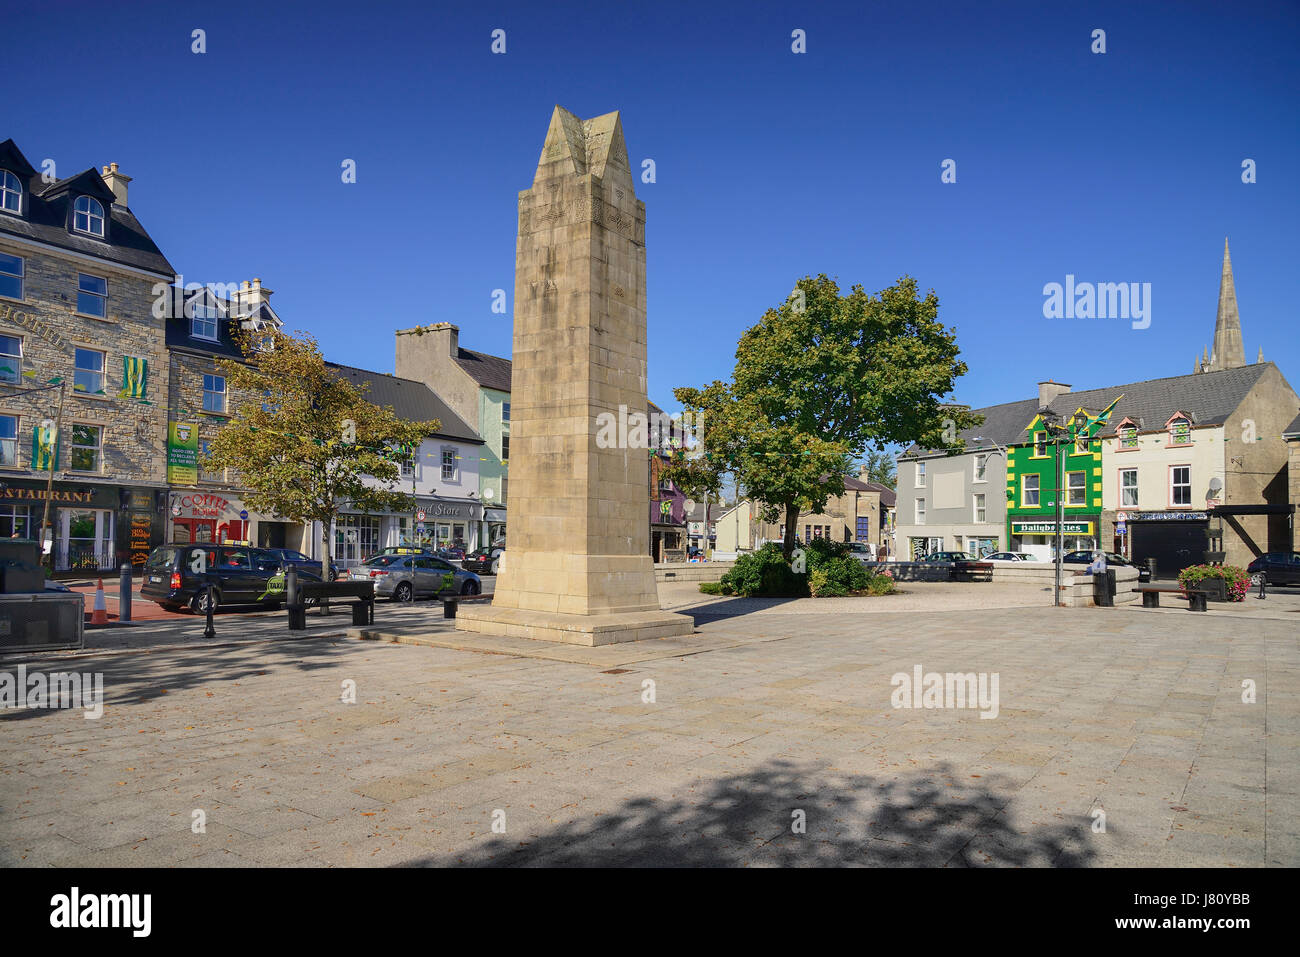 Ireland,County Donegal, Donegal Town, The Diamond with Obelisk which commemorates four monks called the Four Masters who compiled and wrote the Annals Stock Photo